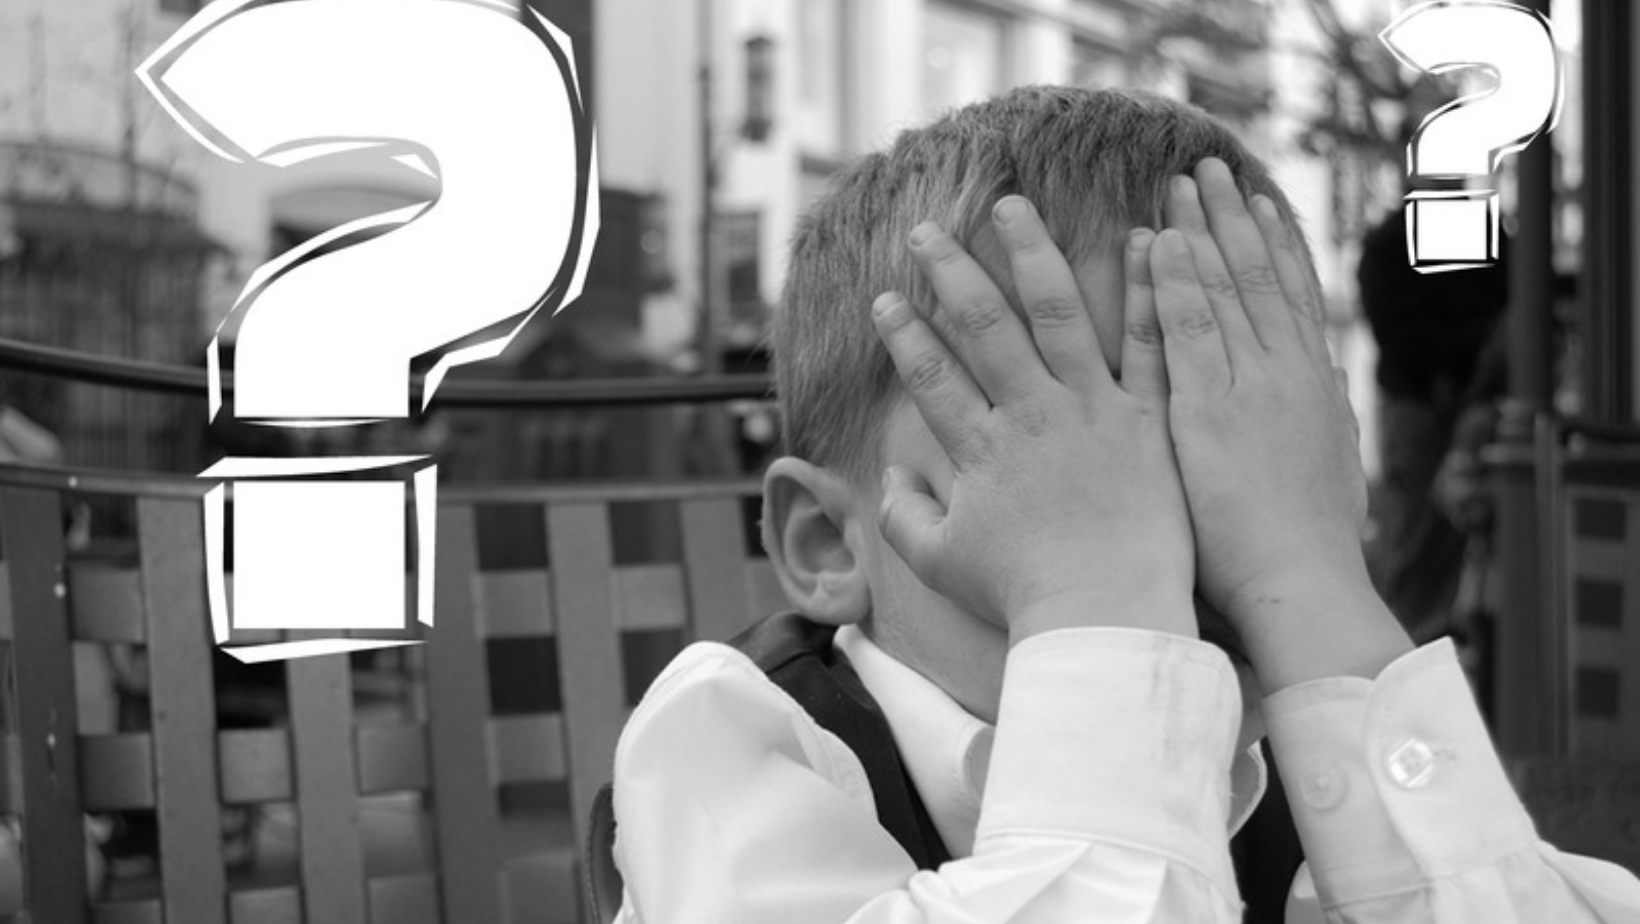 A little boy covering his eyes with his hands and a big question mark.